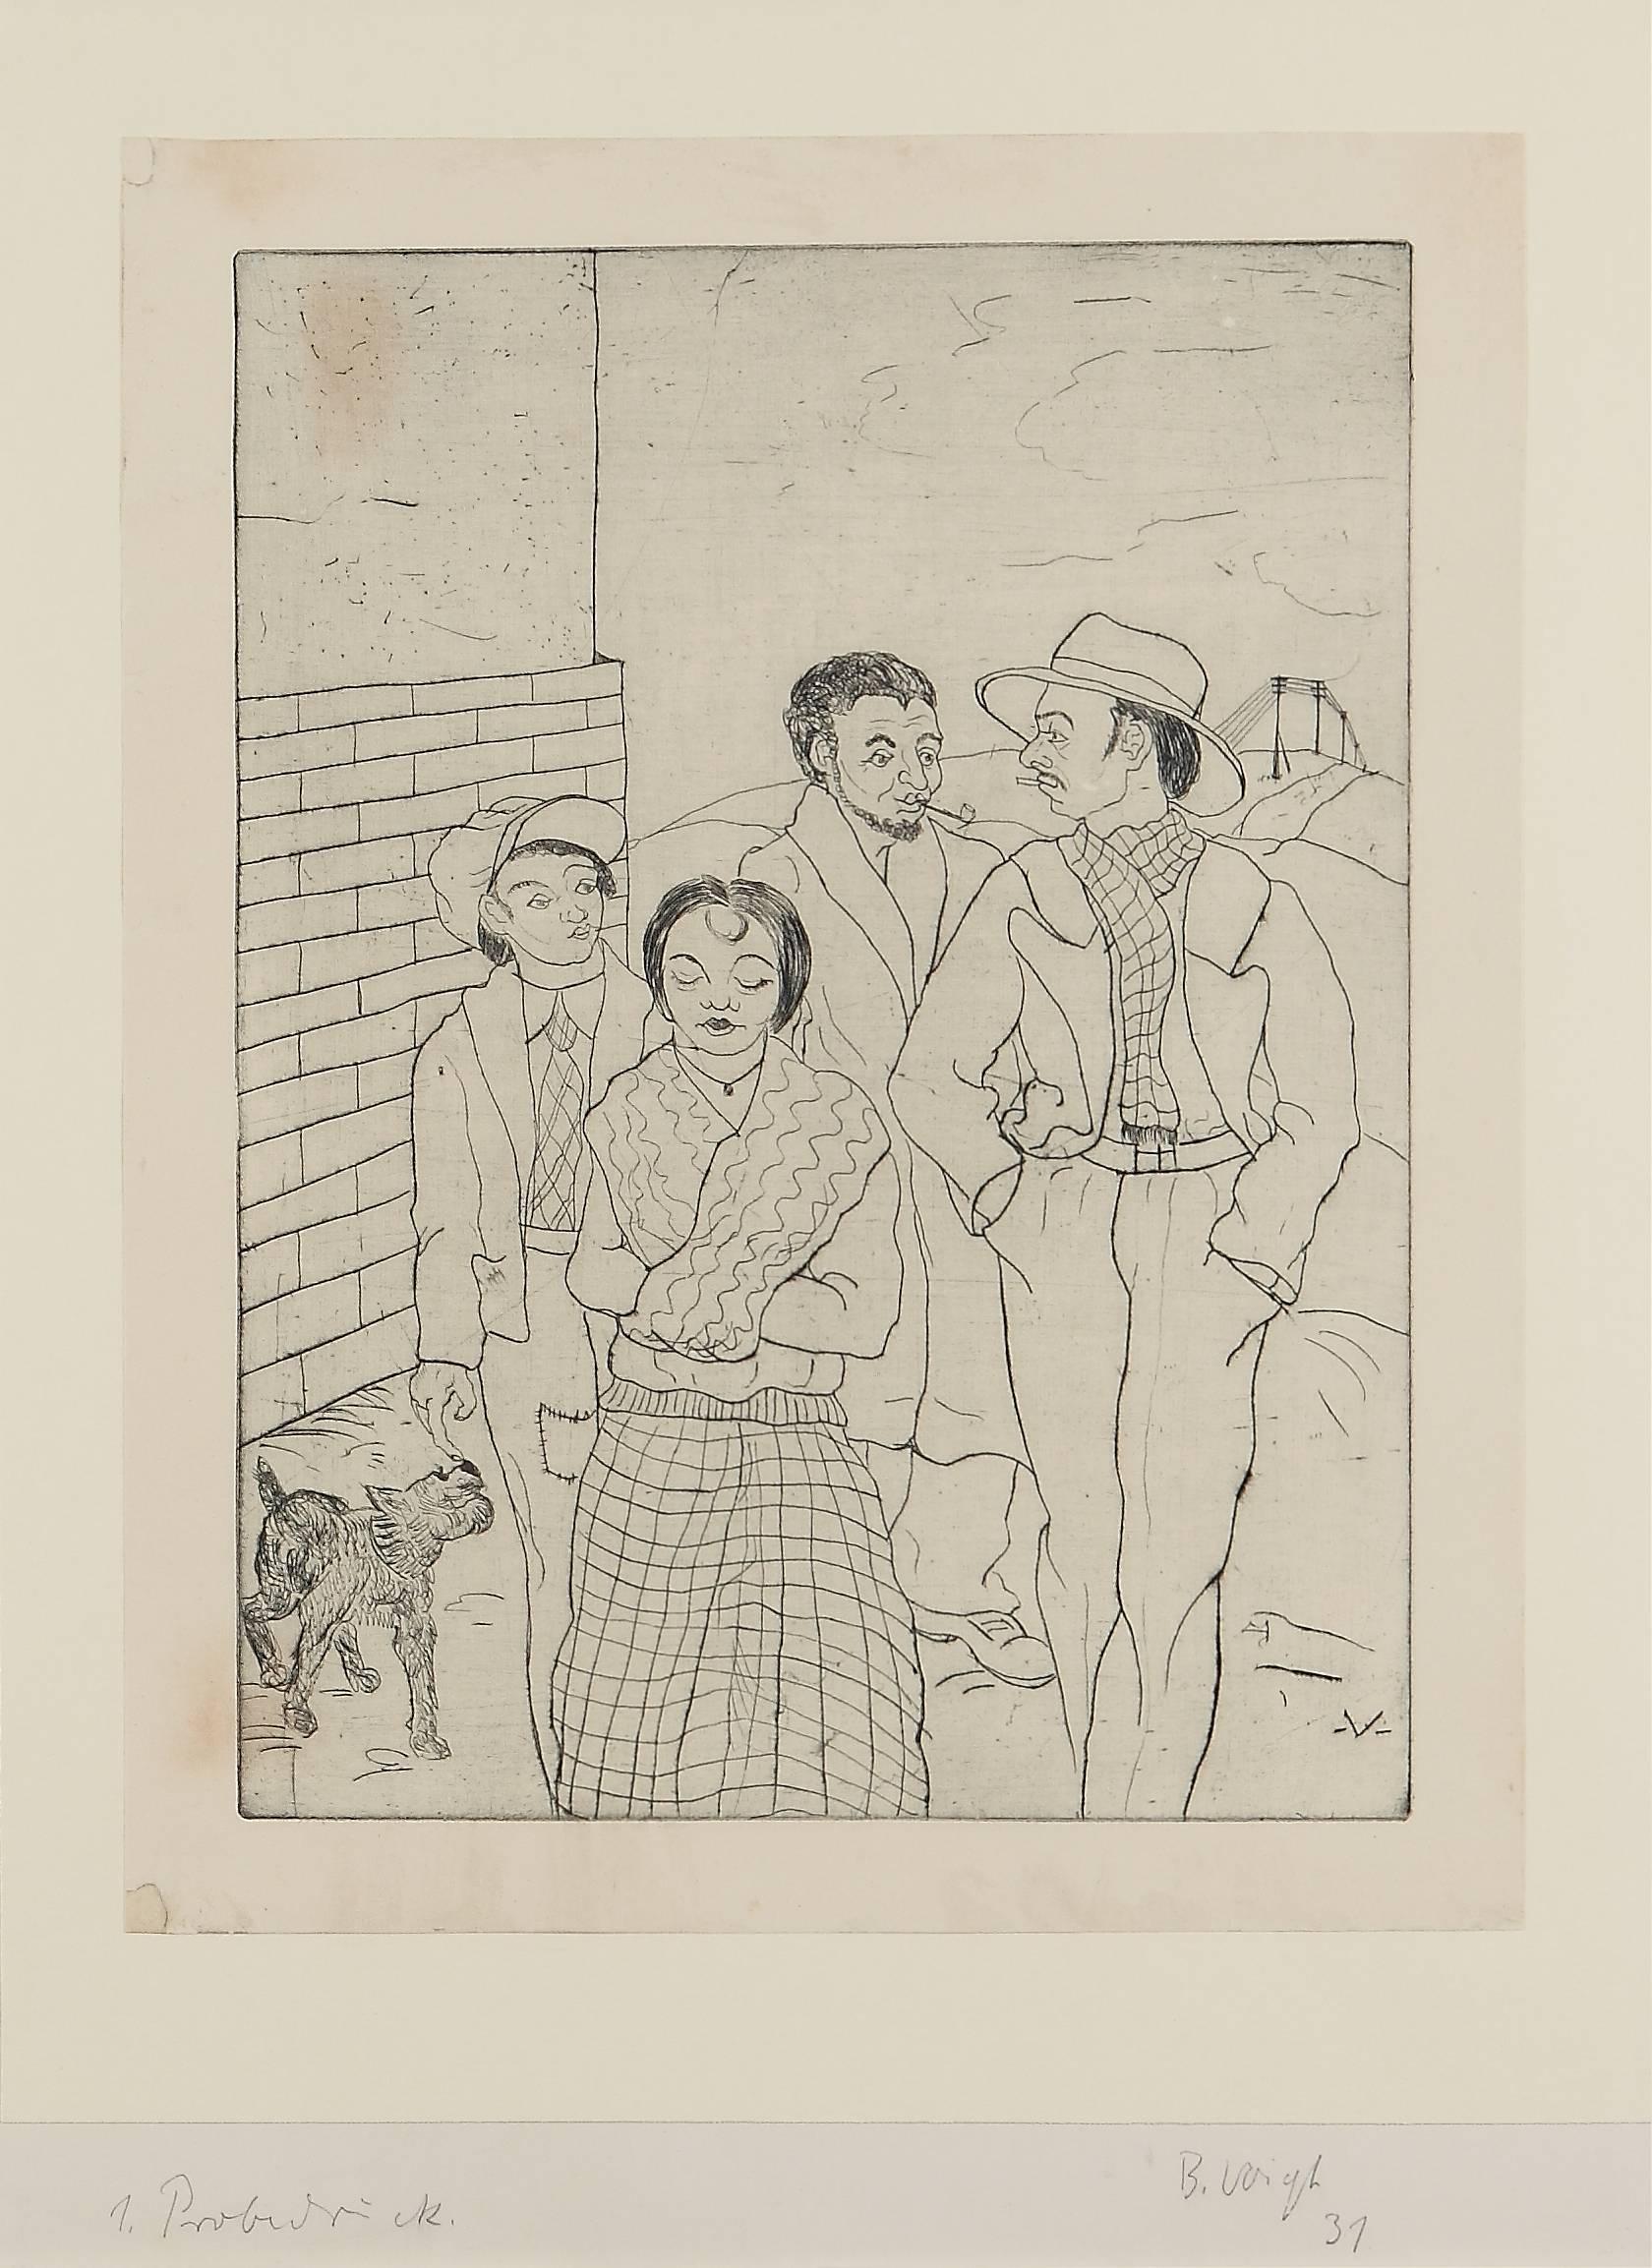 Etching on paper, 1931 by Bruno Voigt ( 1912-1988 ), Germany. First proof copy. Sheet with monogram -V- 
Signed and dated lower right: B.Voigt 31, lower left: 1. Probedruck. 19.29 x 14.57 in ( 49 x 37 cm ) Framed.